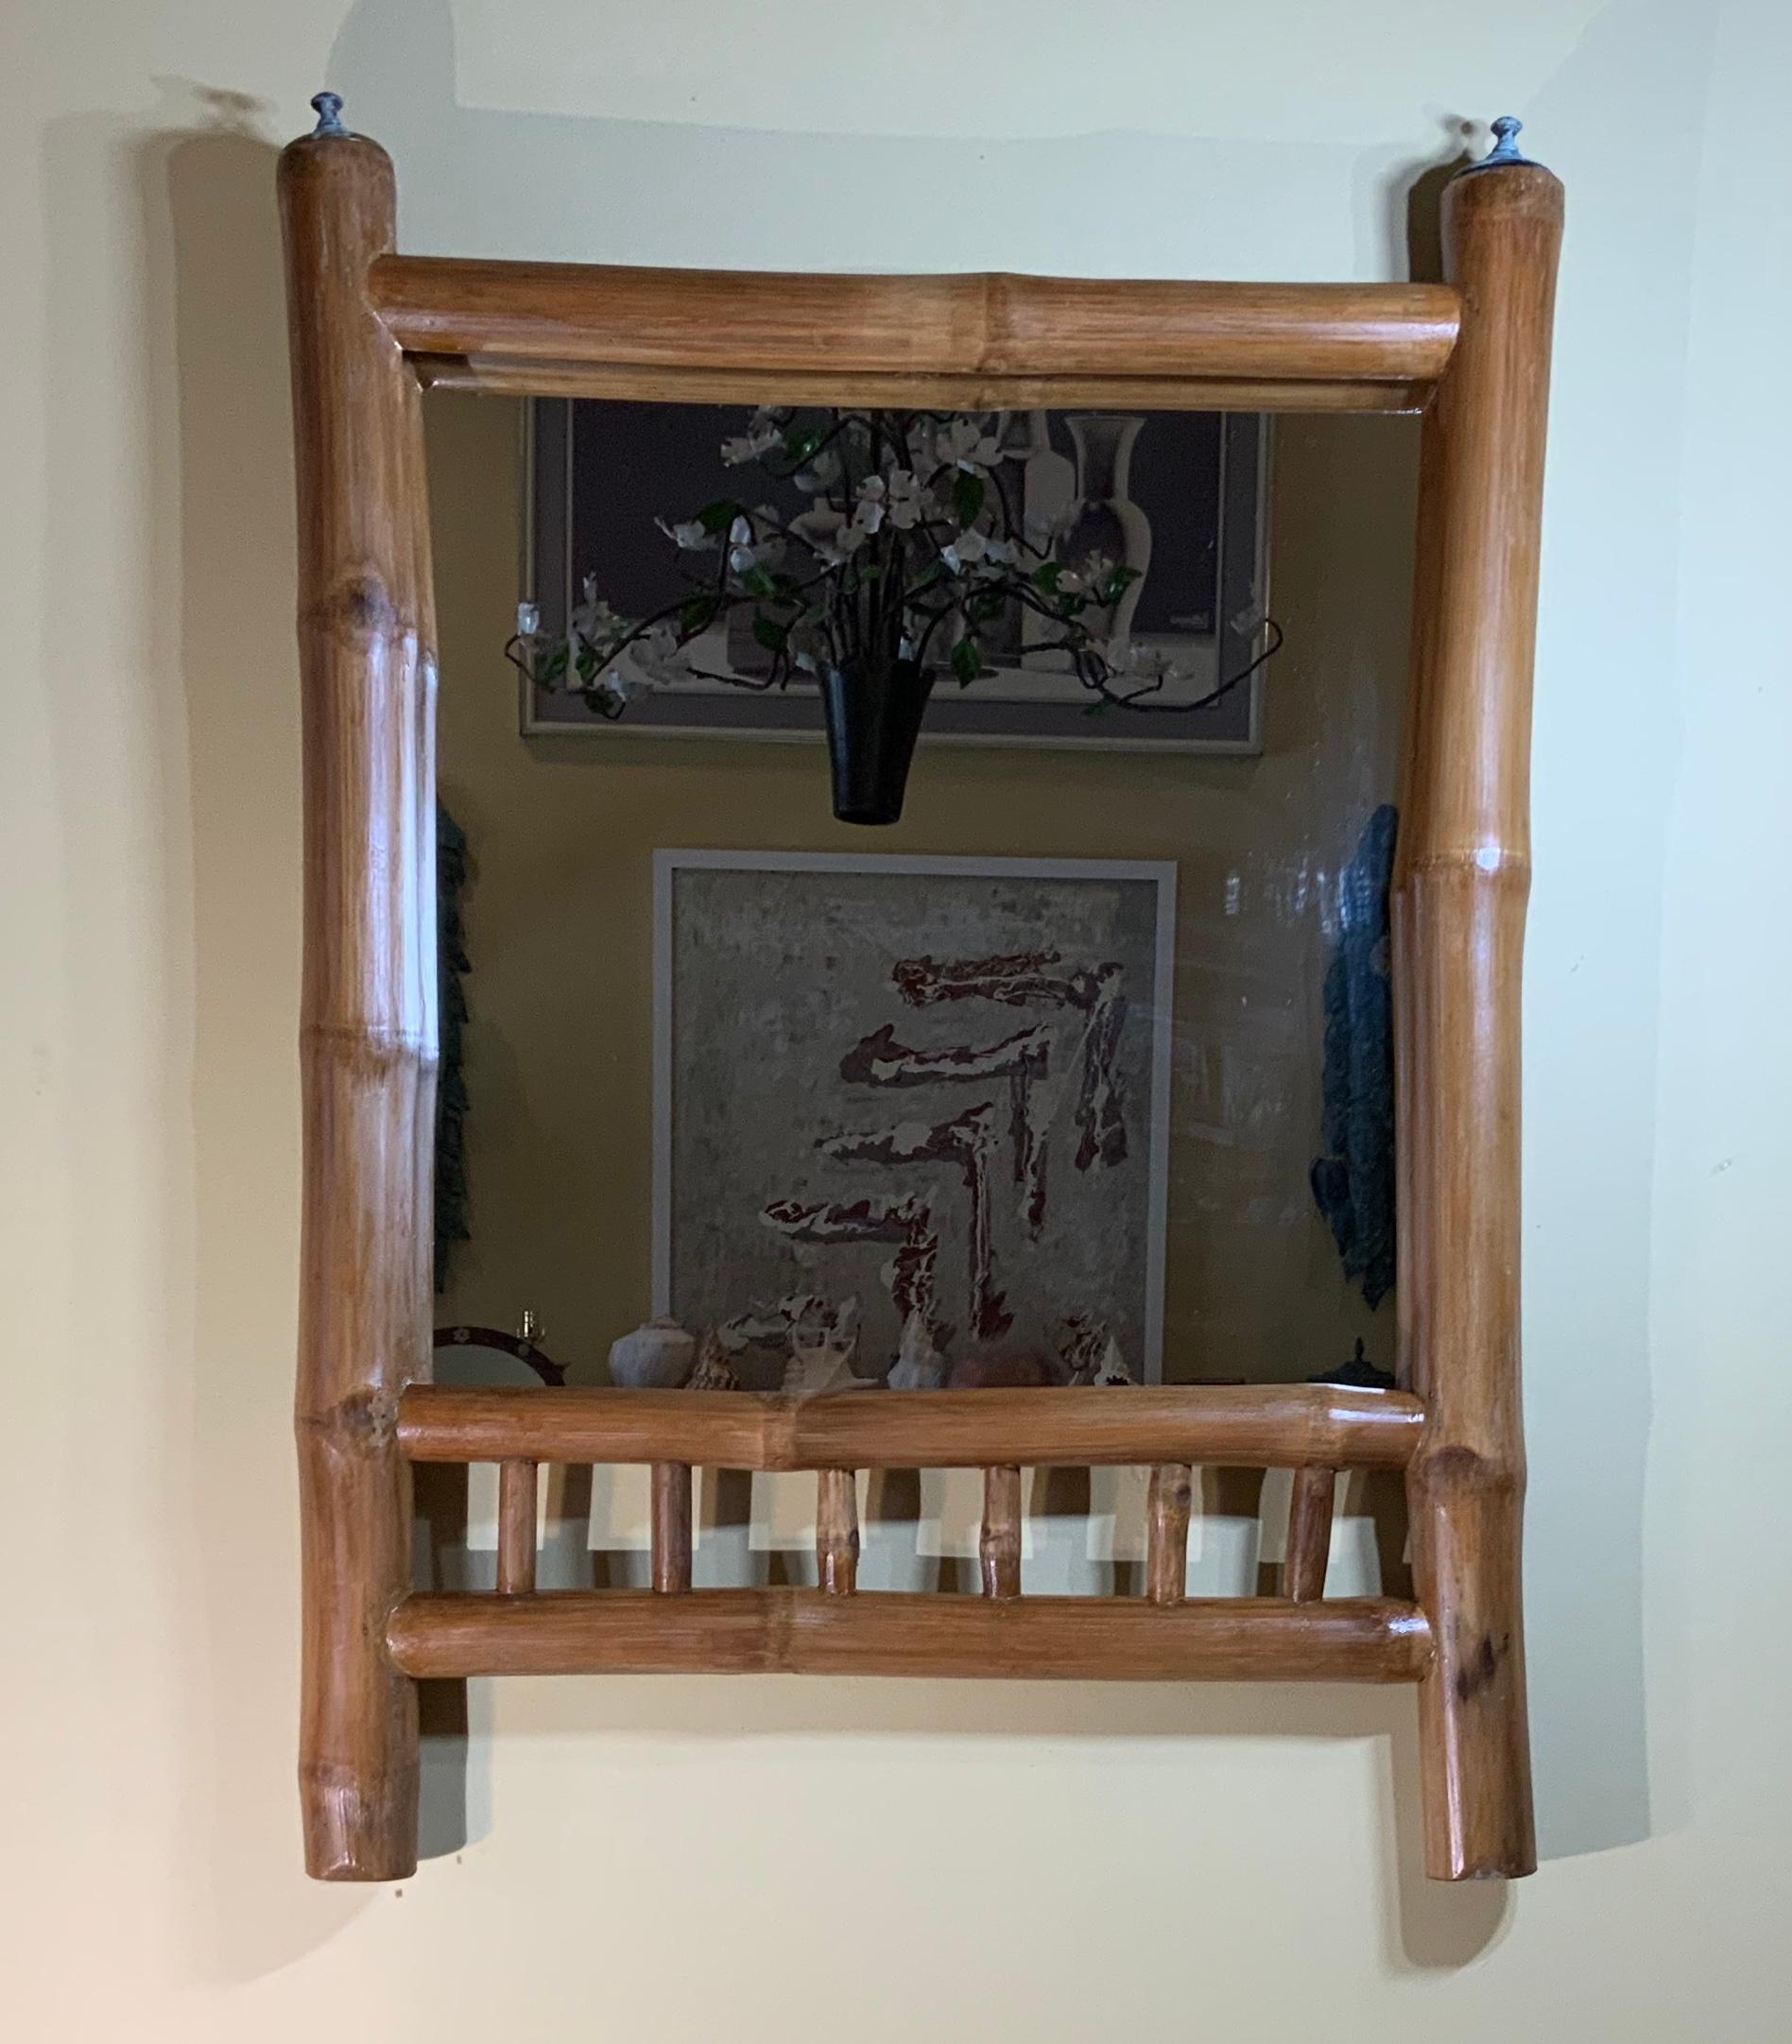 Exceptional wall hanging mirror made of thick natural bamboo, clear stain-polish ,with decorative brass finial one on each side top. Will look great at cabin or country side house.